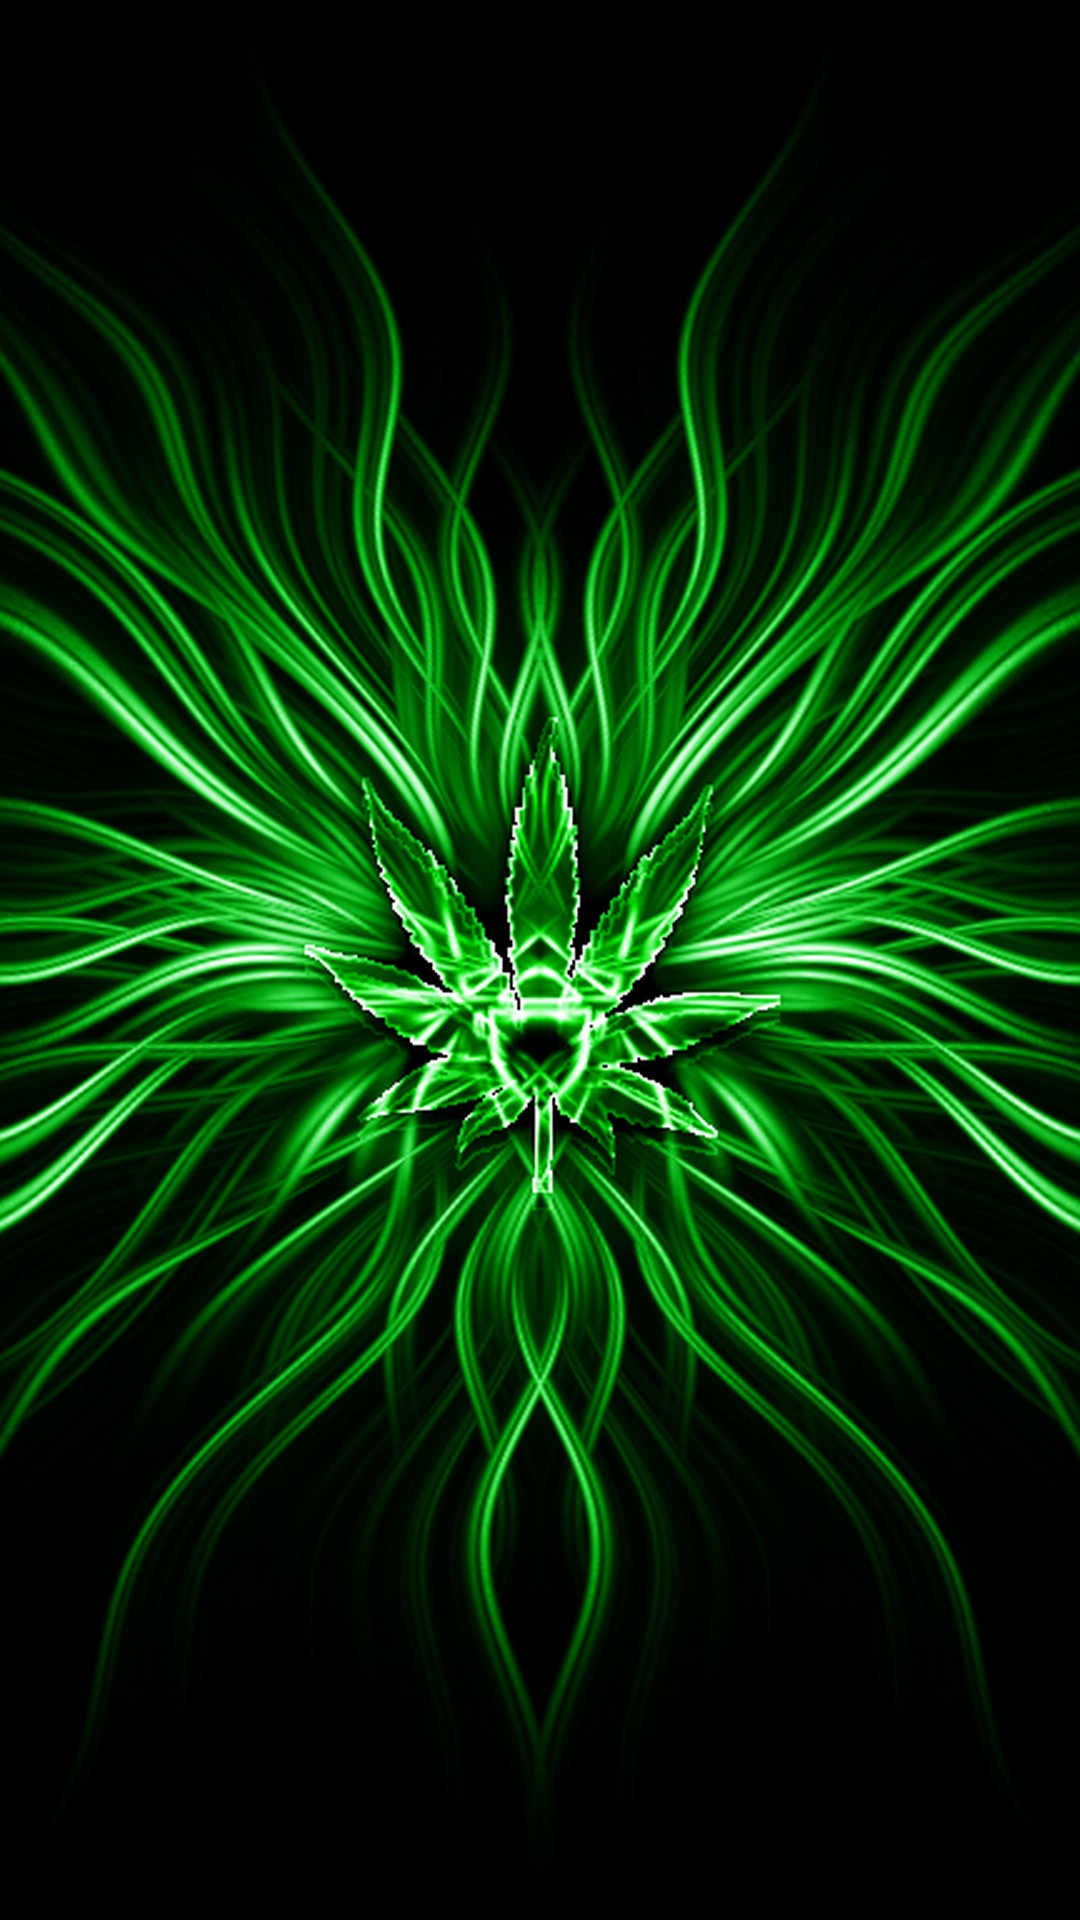 Neon Green Wallpaper iPhone with image resolution 1080x1920 pixel. You can make this wallpaper for your iPhone 5, 6, 7, 8, X backgrounds, Mobile Screensaver, or iPad Lock Screen